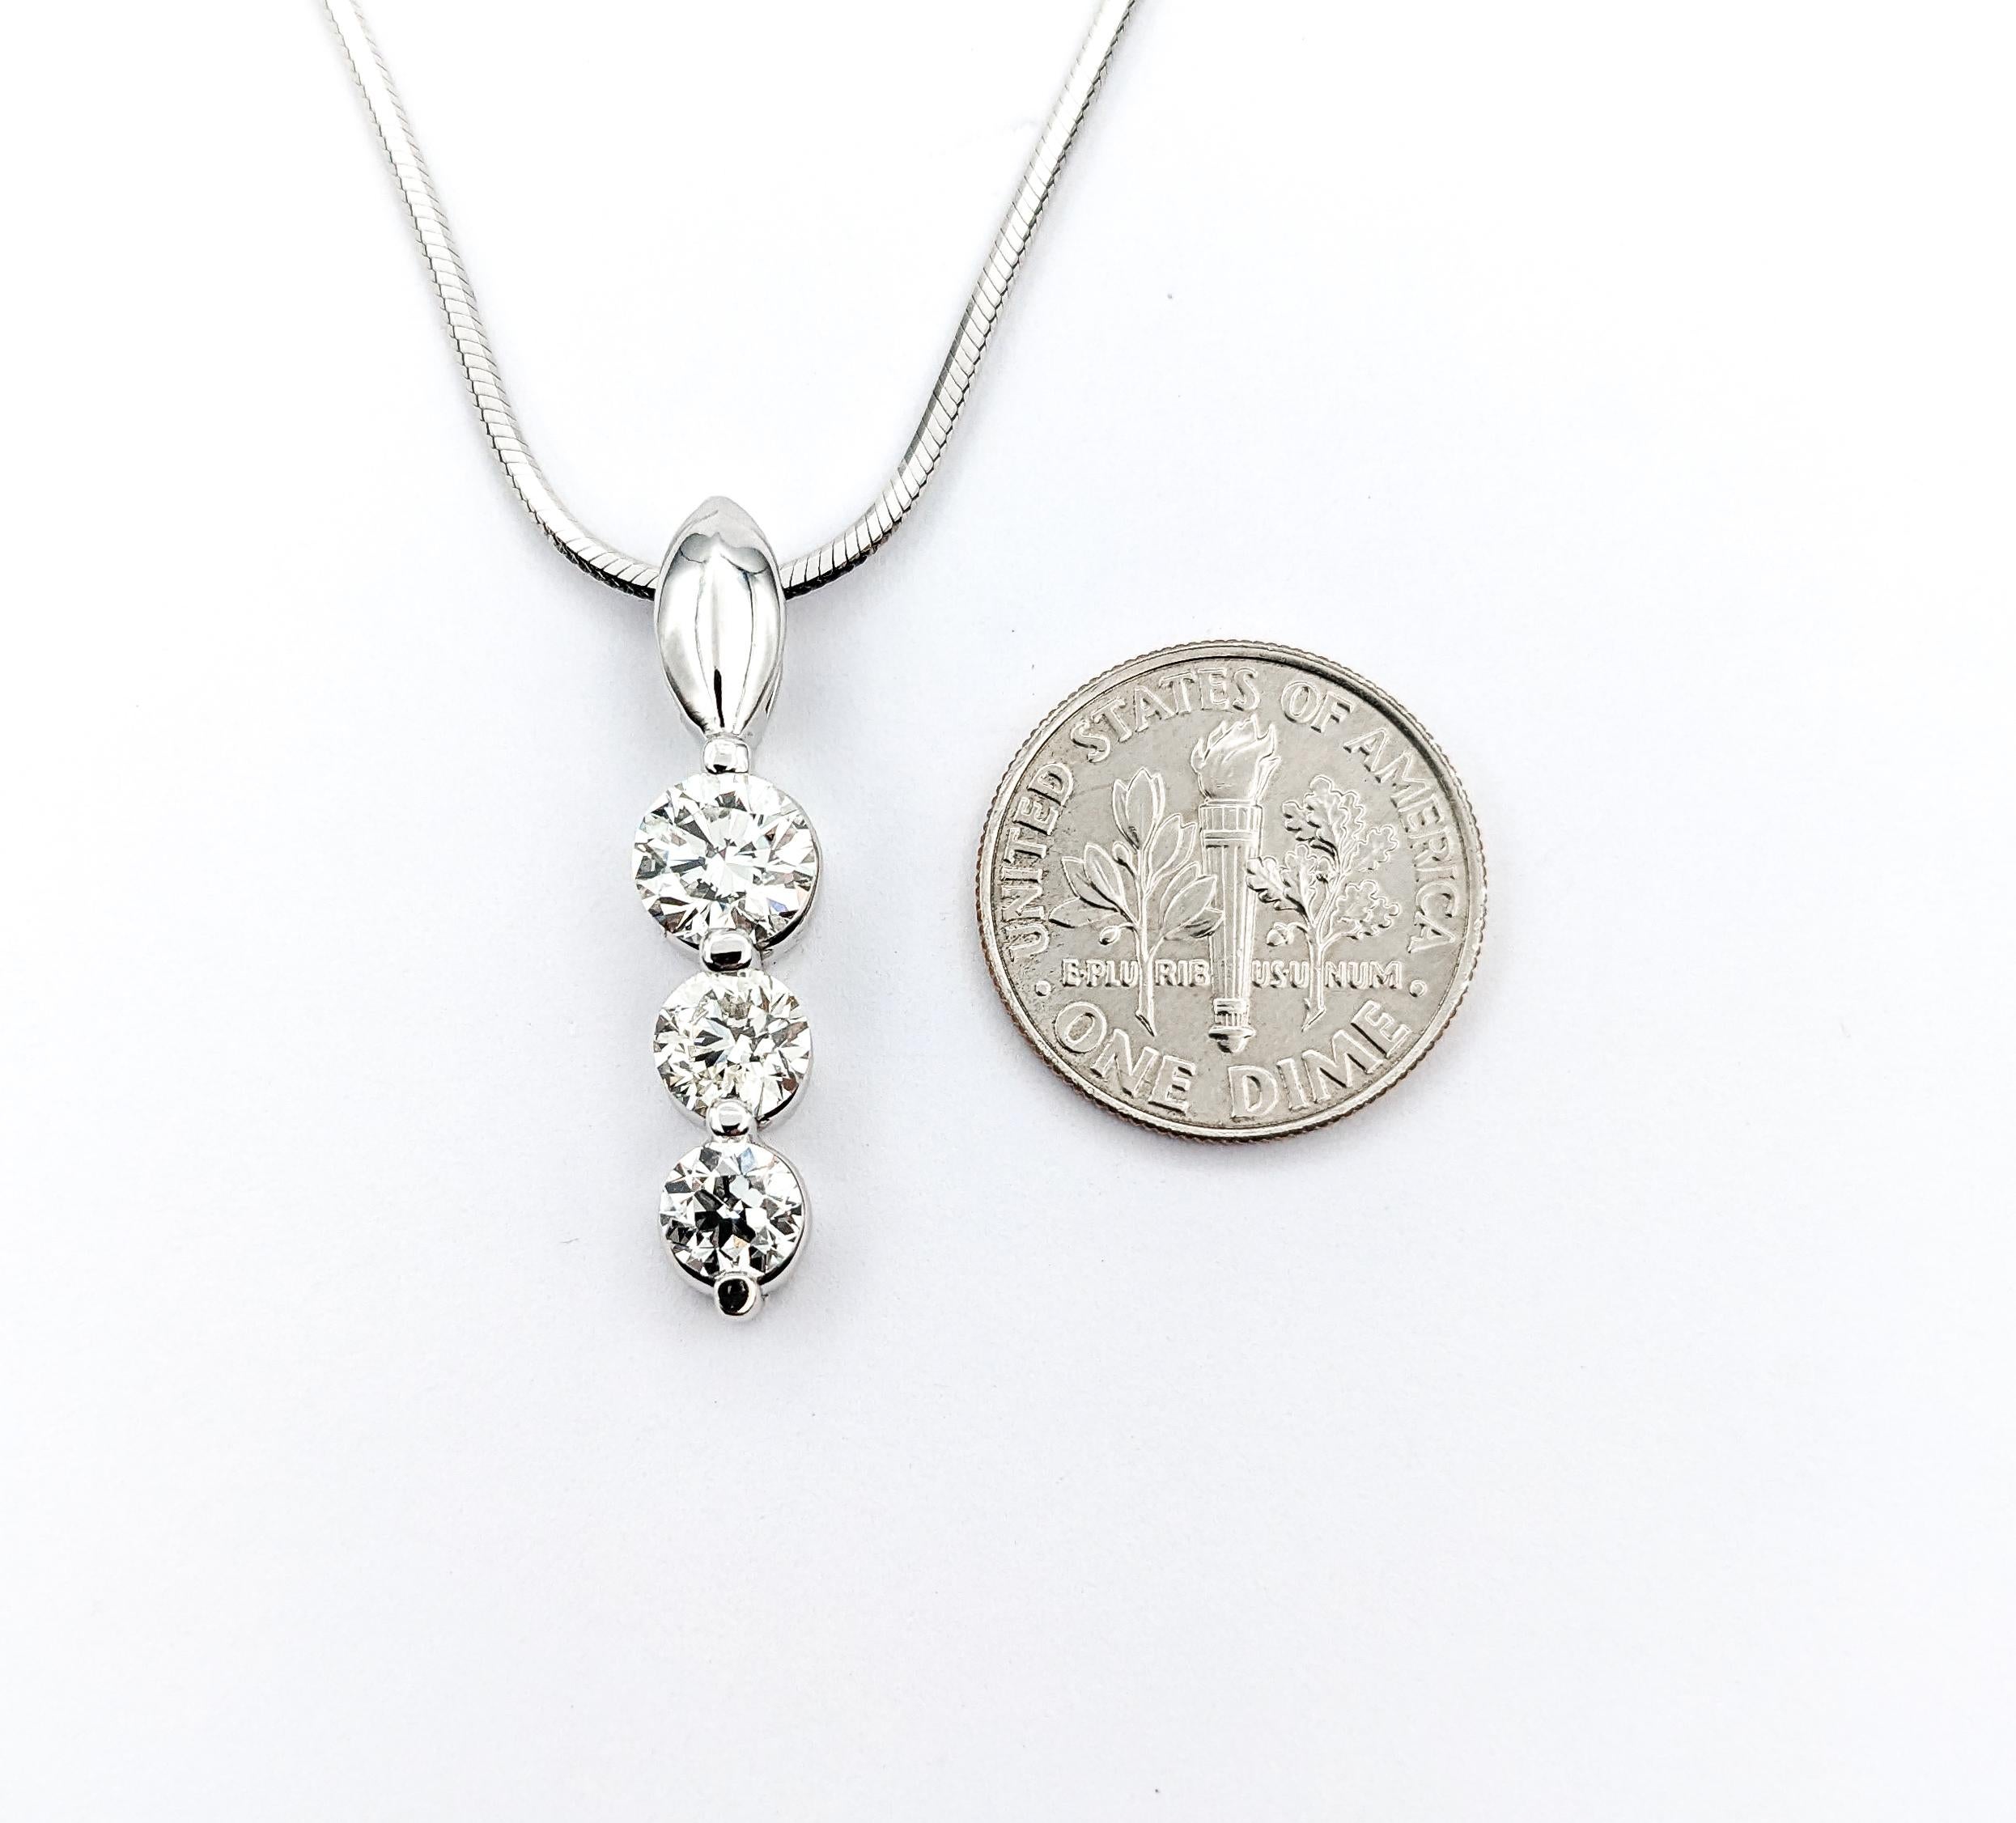 Romantic Past, Present, Future Diamond Pendant Necklace in White Gold In Excellent Condition For Sale In Bloomington, MN